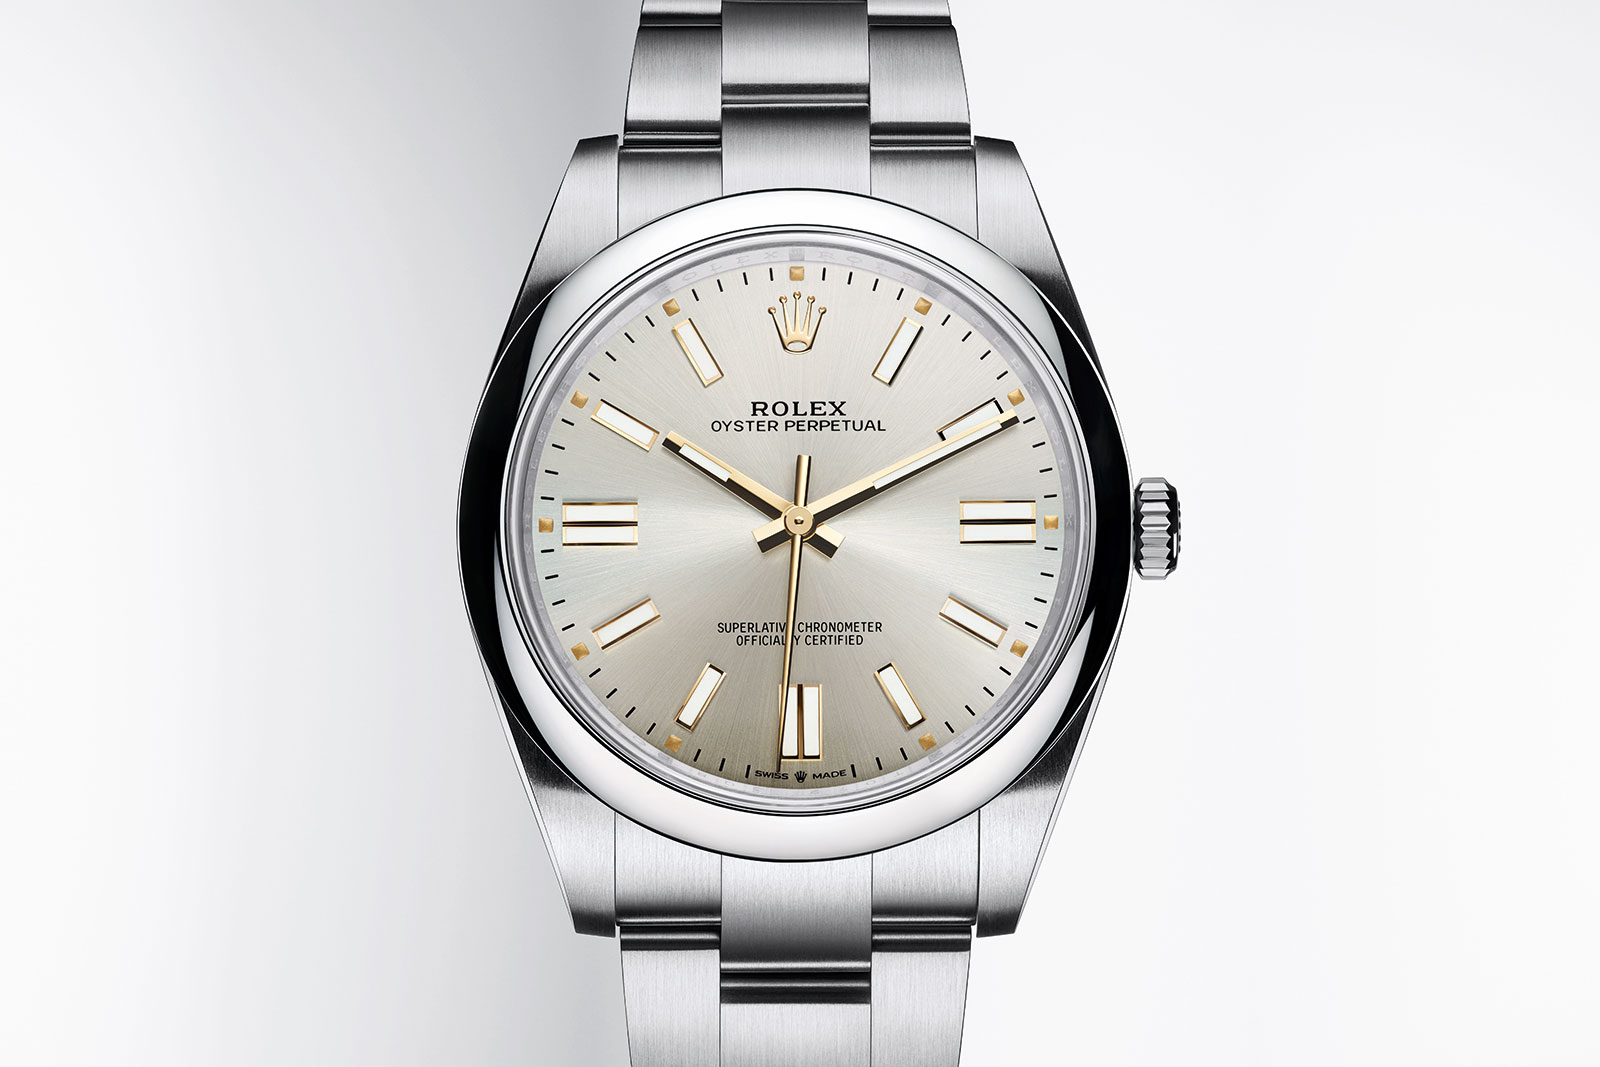 Rolex Oyster Perpetual In Oystersteel, M124200-0002, 53% OFF